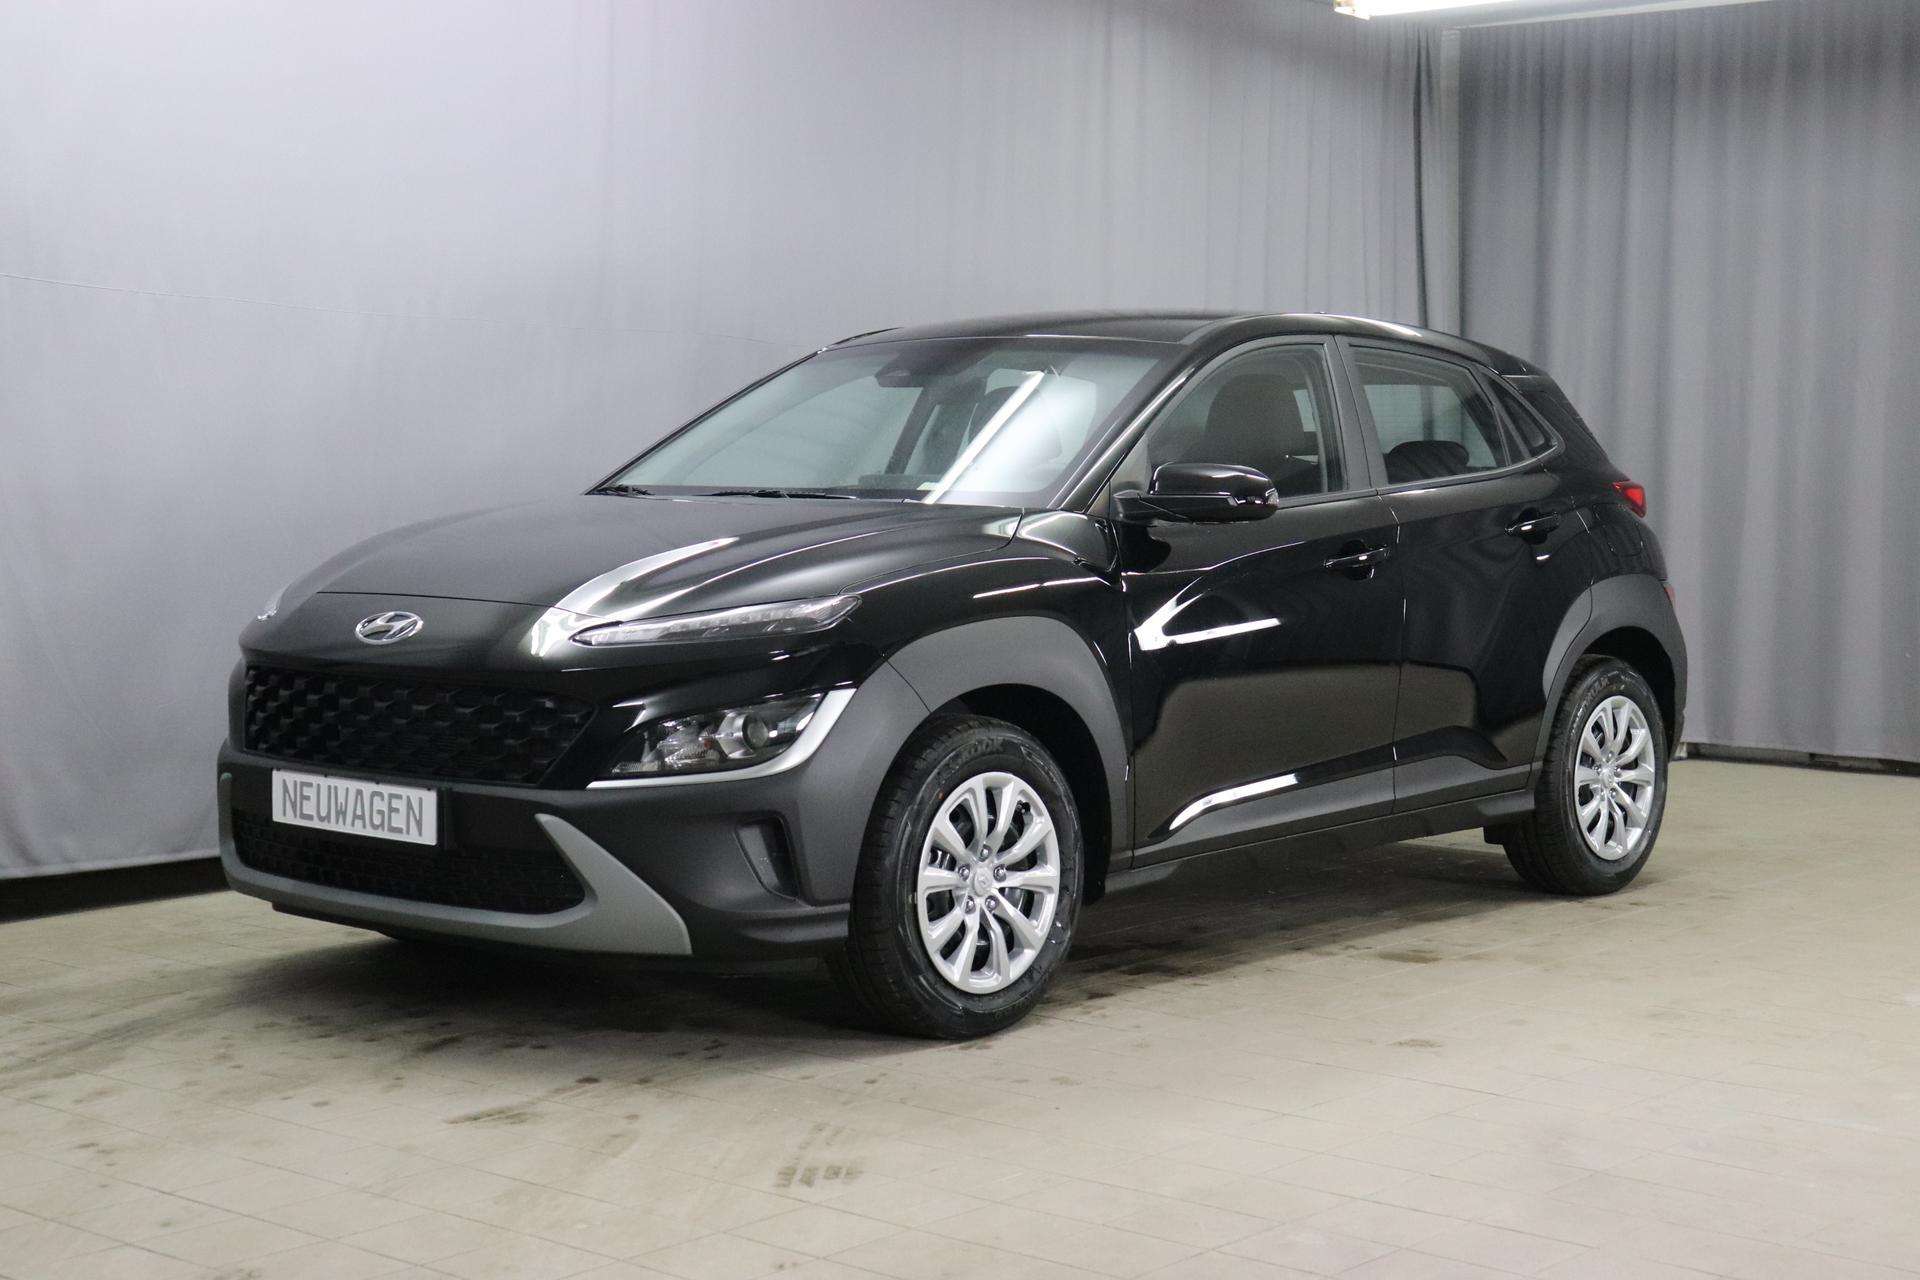 Hyundai KONA Off-Road/Pick-up in Grey new in Osnabrück for € 21,580.-